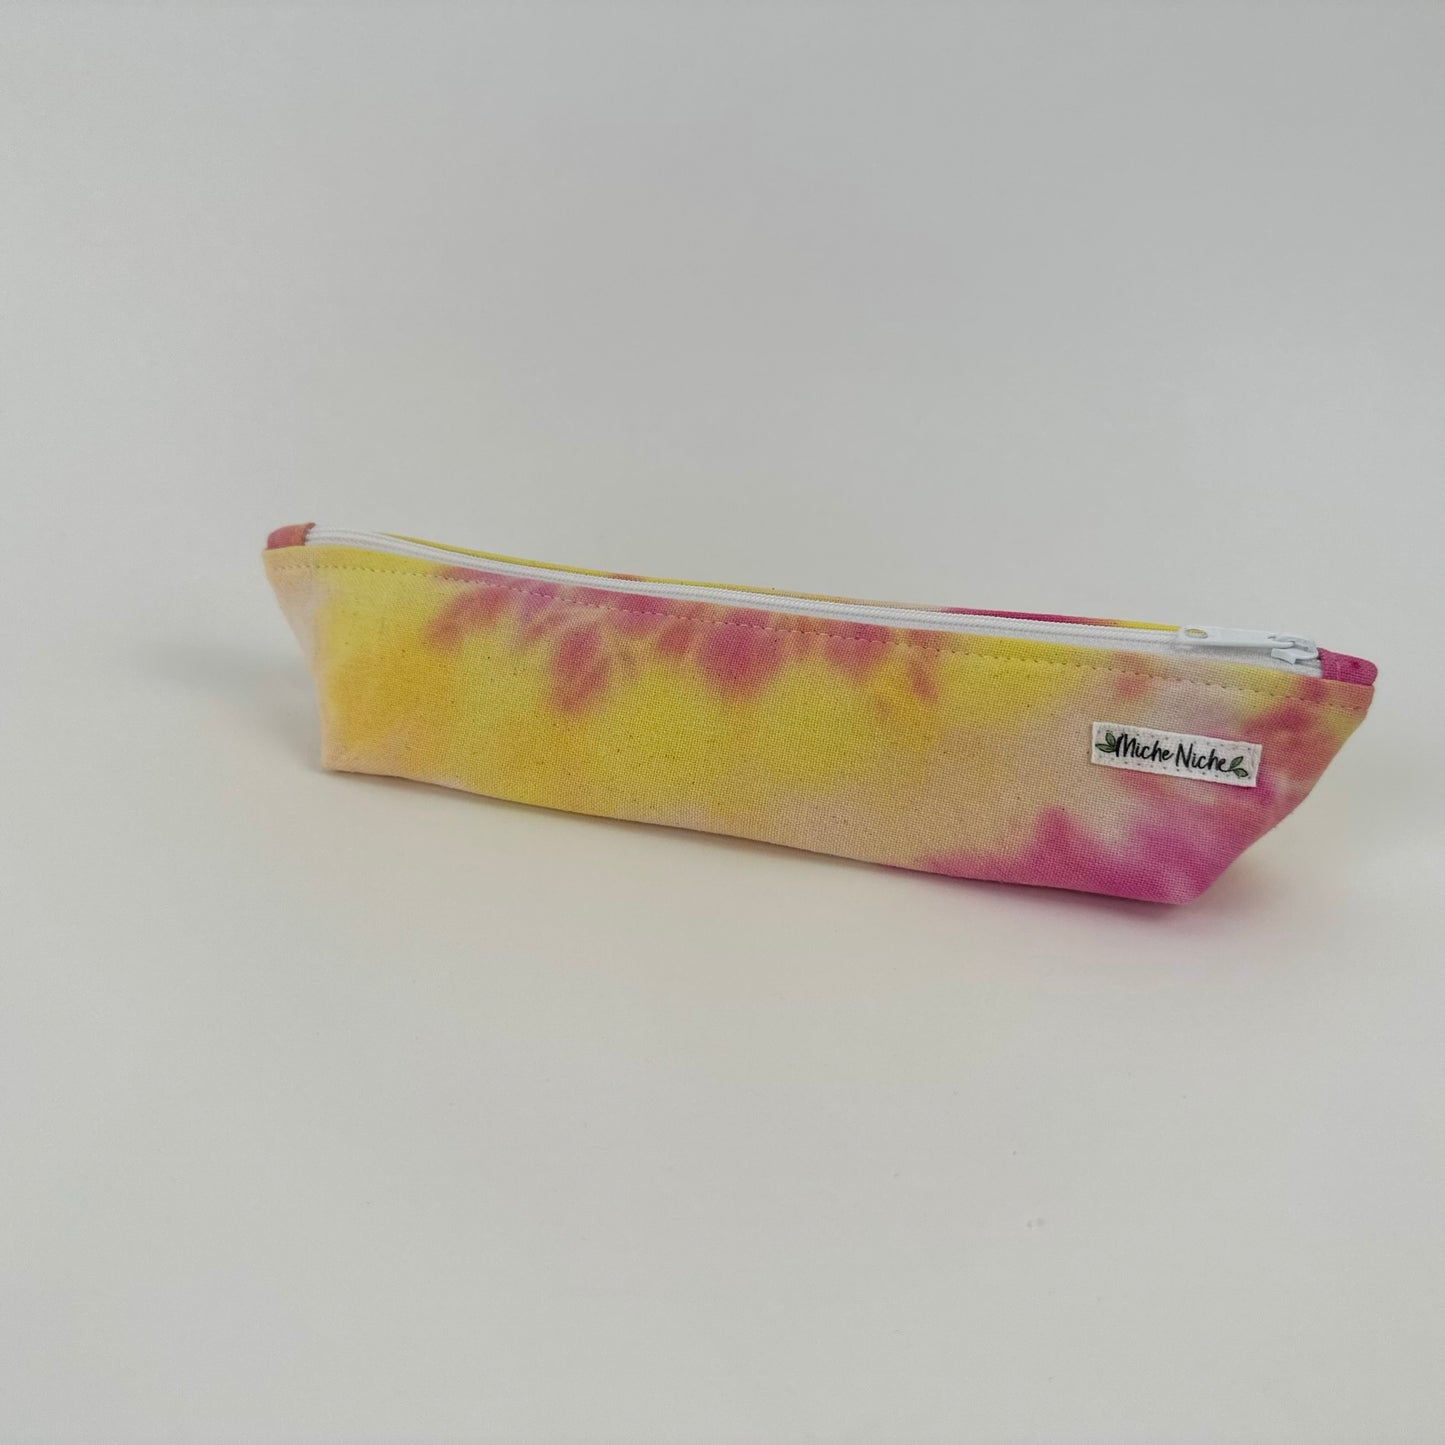 Miche Niche zipper pouch in a hand dyed pattern of pink, yellow and fuchsia. 